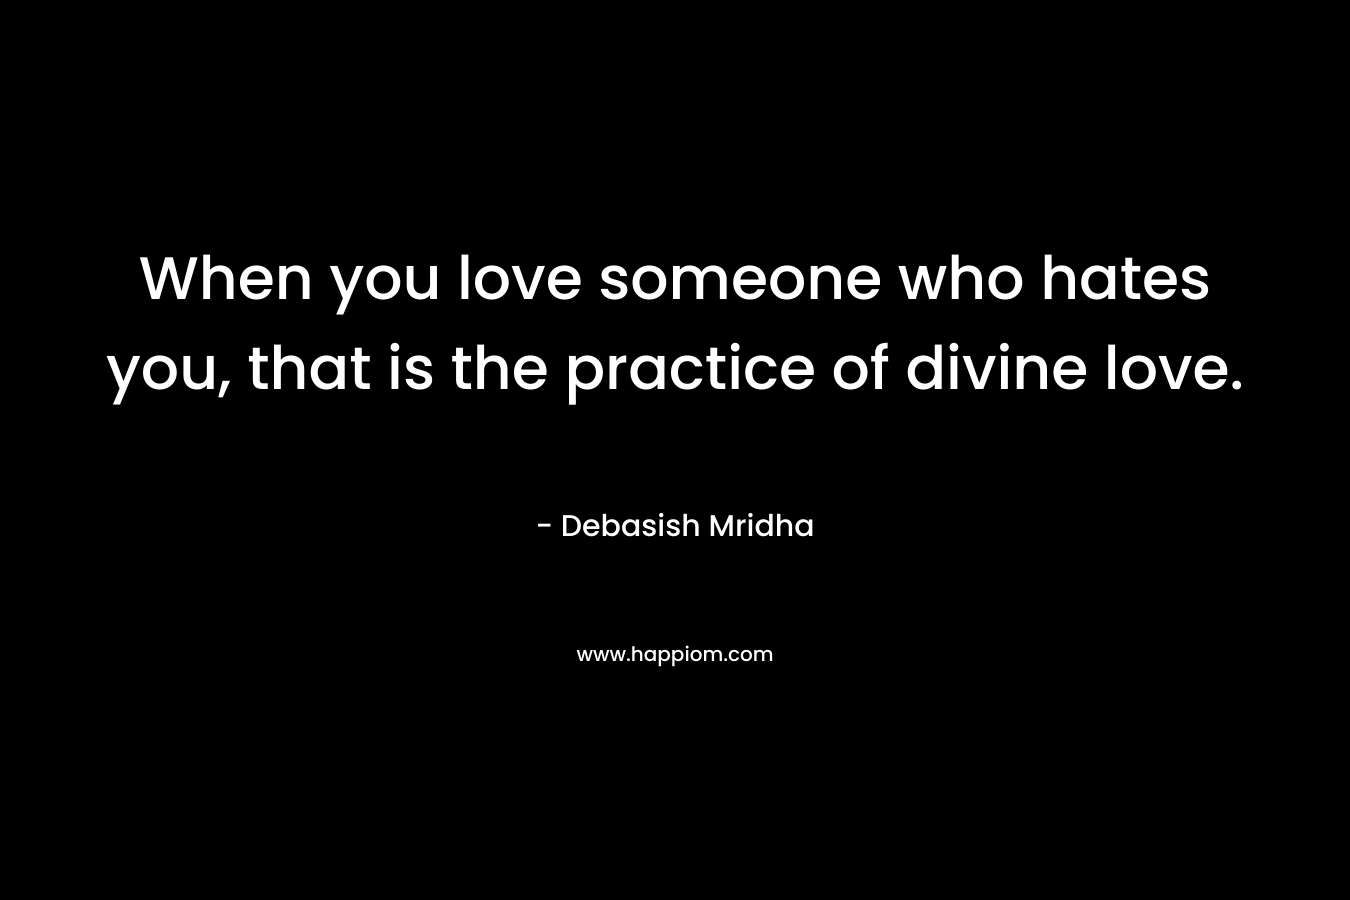 When you love someone who hates you, that is the practice of divine love.